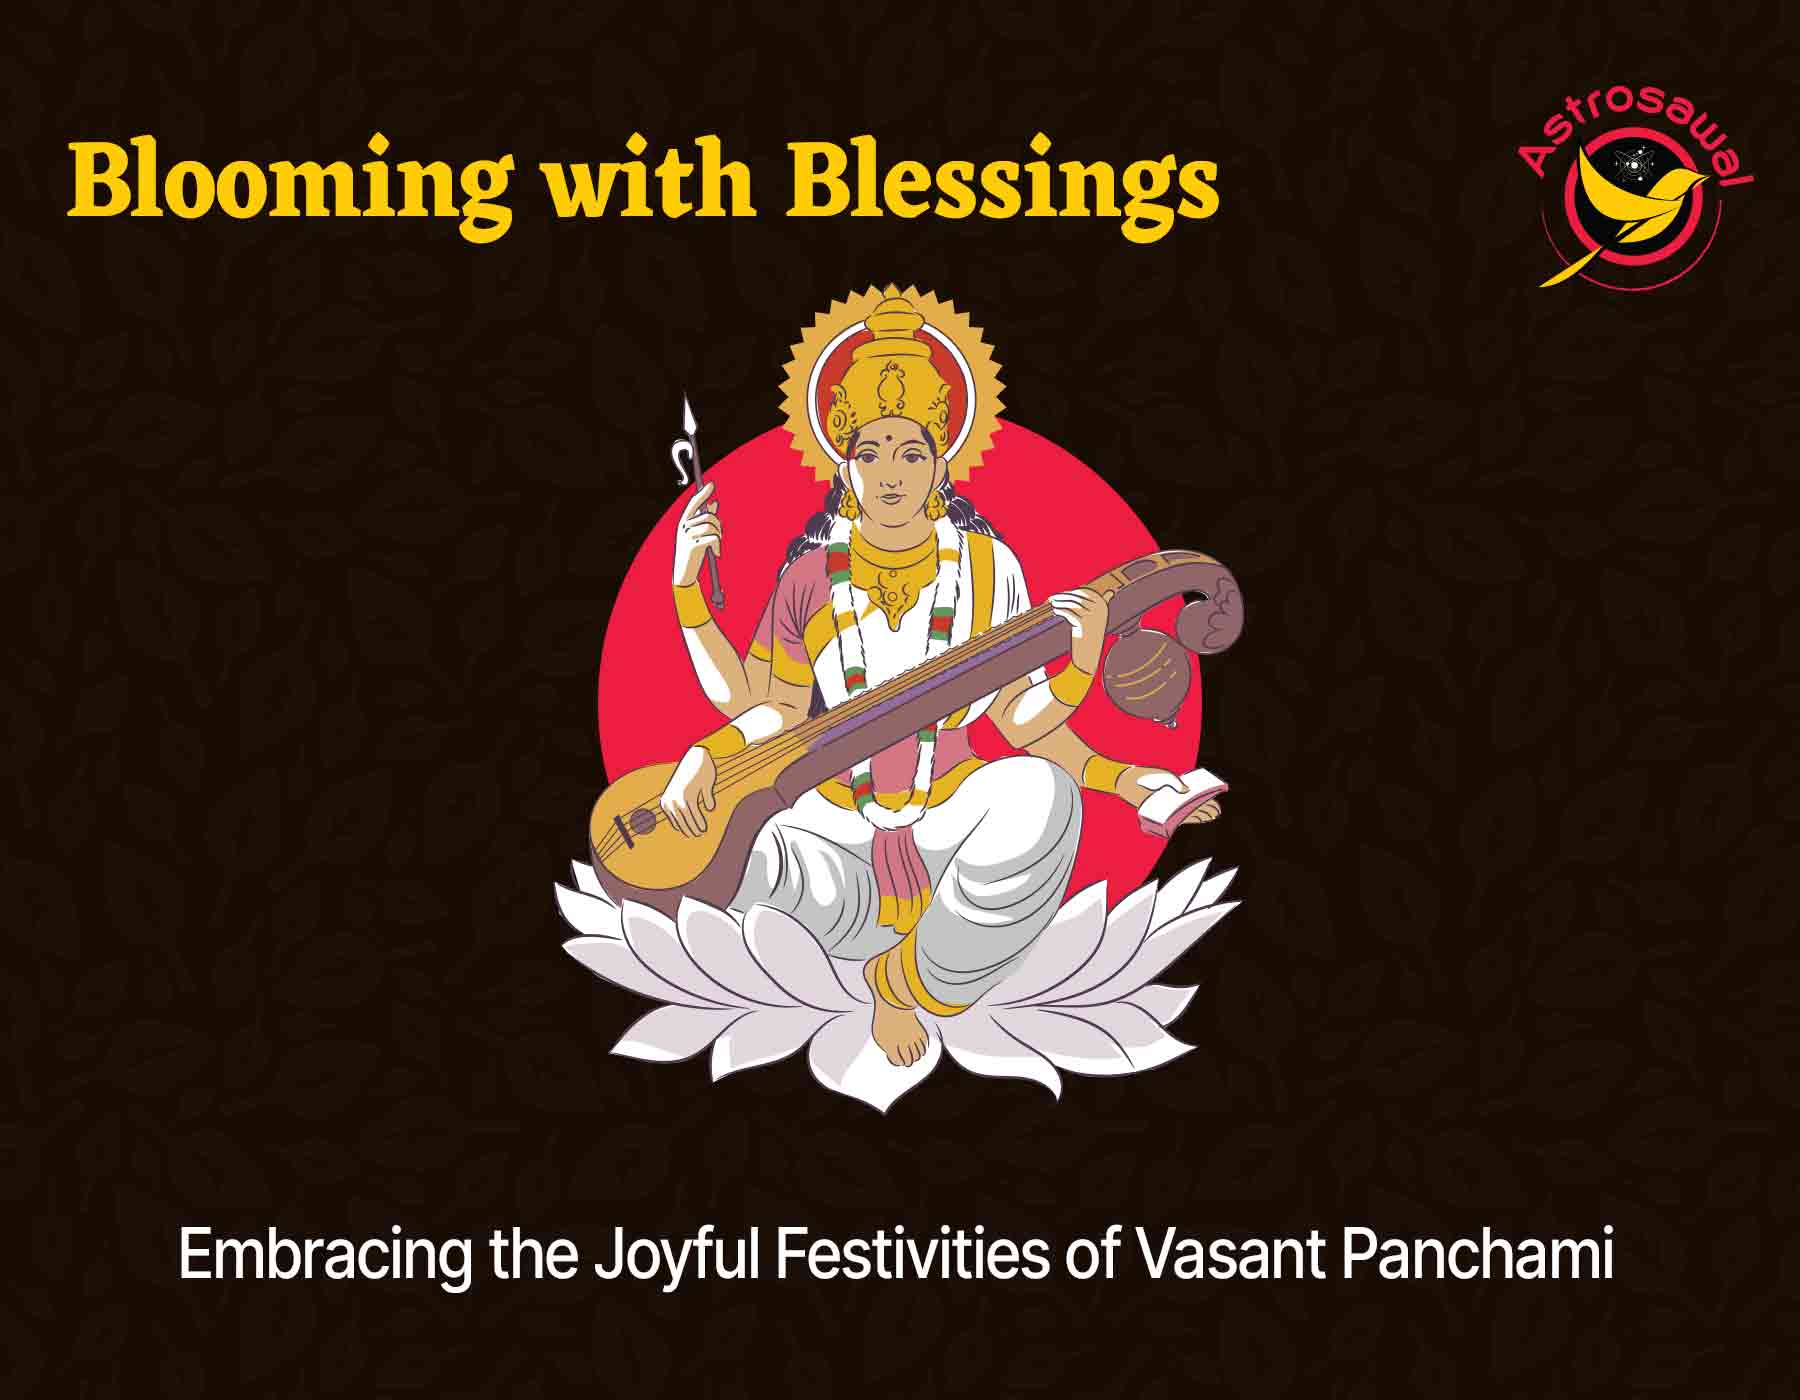 Blooming with Blessings: Embracing the Joyful Festivities of Vasant Panchami